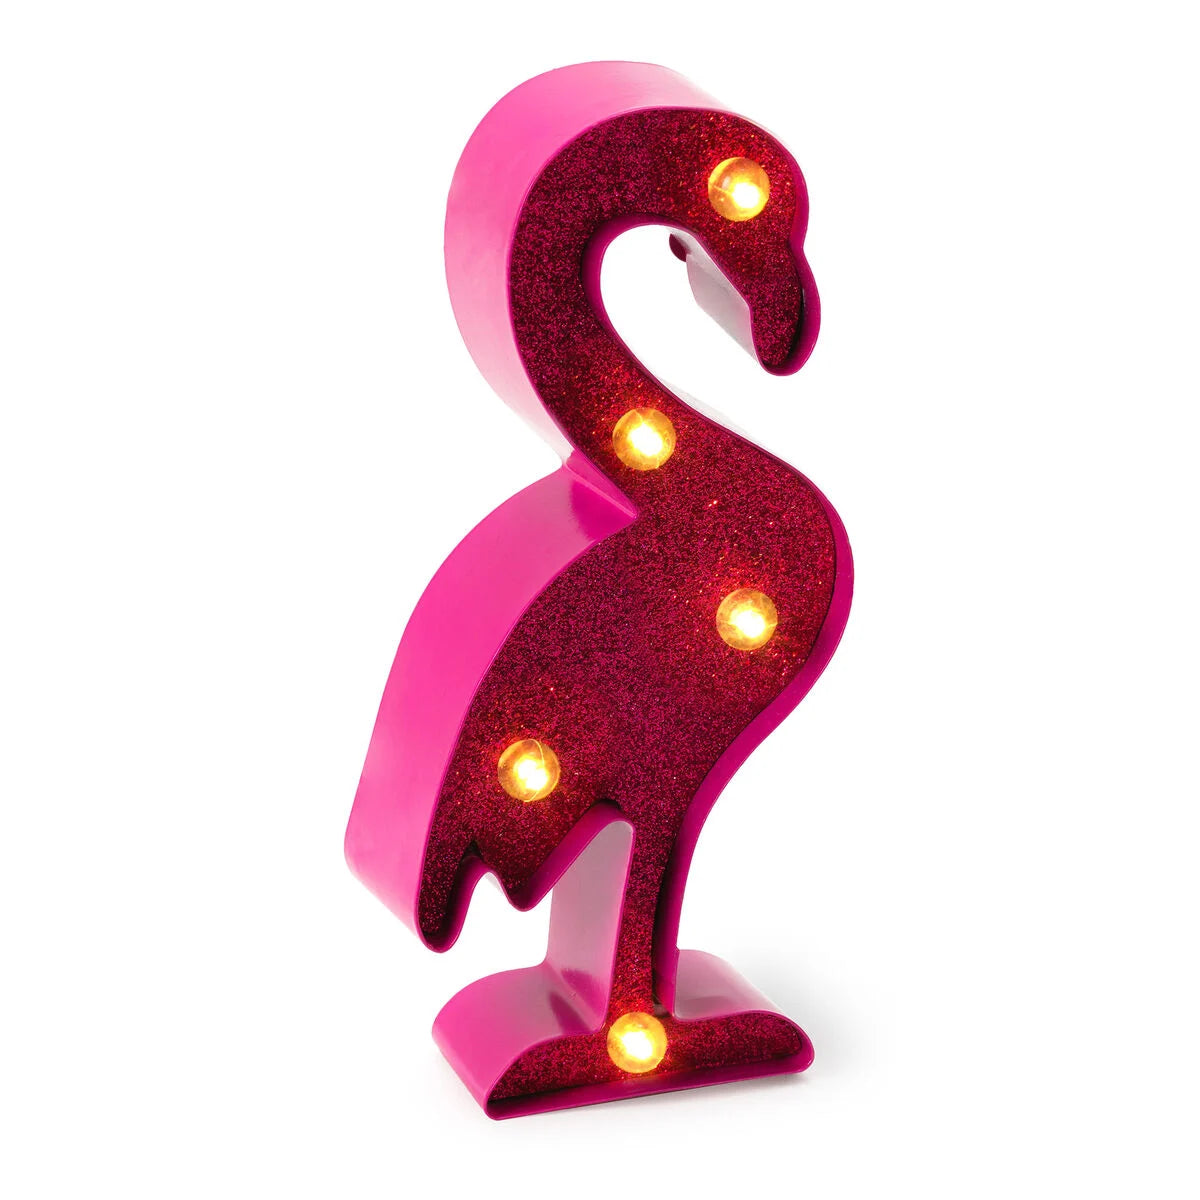 Fab Gifts | Legami Mini Letter Light Flamingo by Weirs of Baggot Street